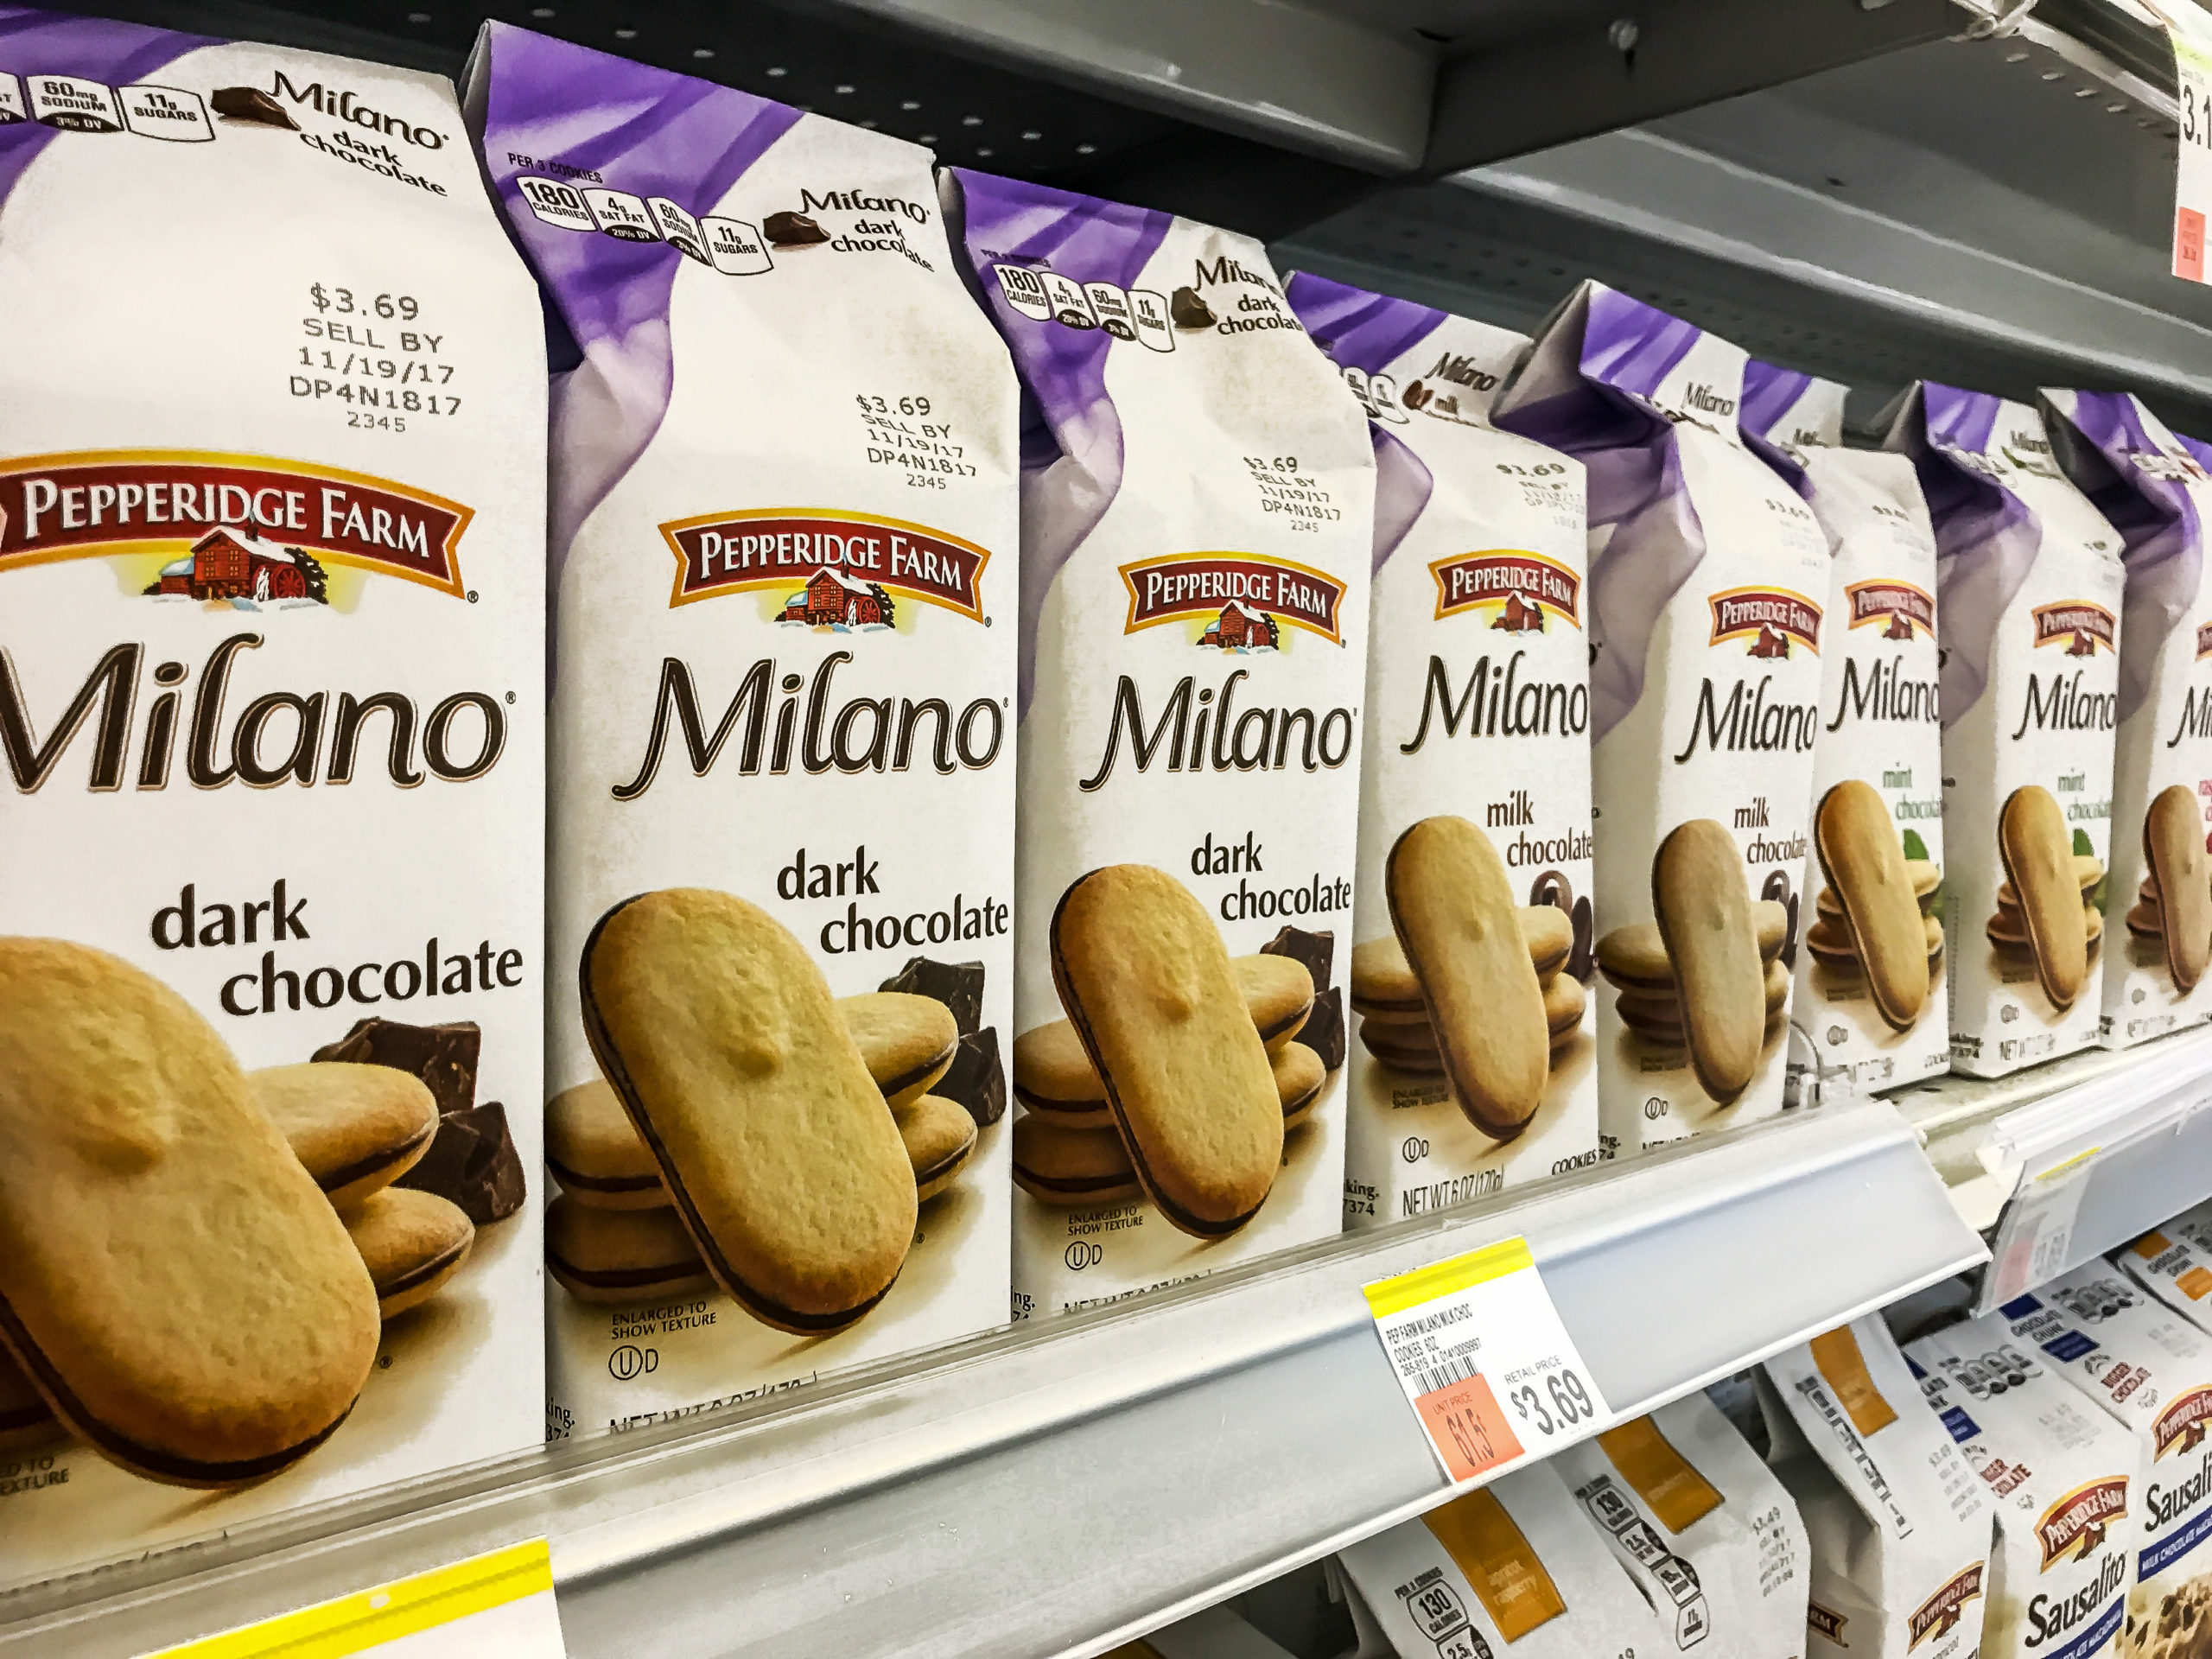 Packages of Milano chocolate cookies stand on a supermarket shelf. (Shutterstock/Roman Tiraspolsky)